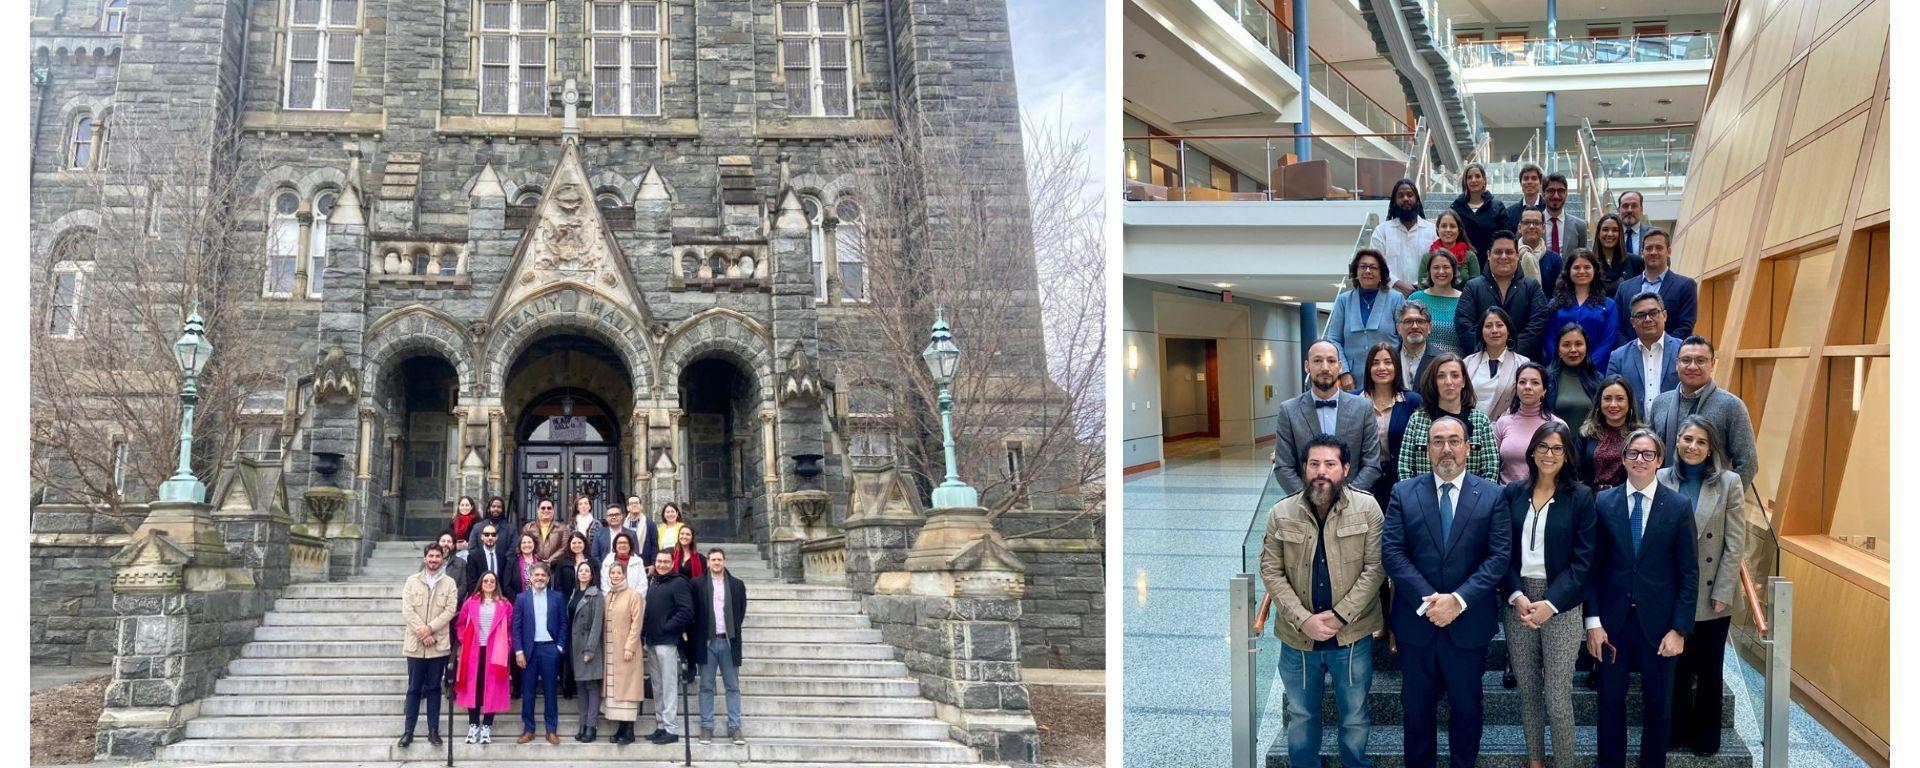 Diploma in Governance CAF-UM student represented Uruguay at Georgetown University